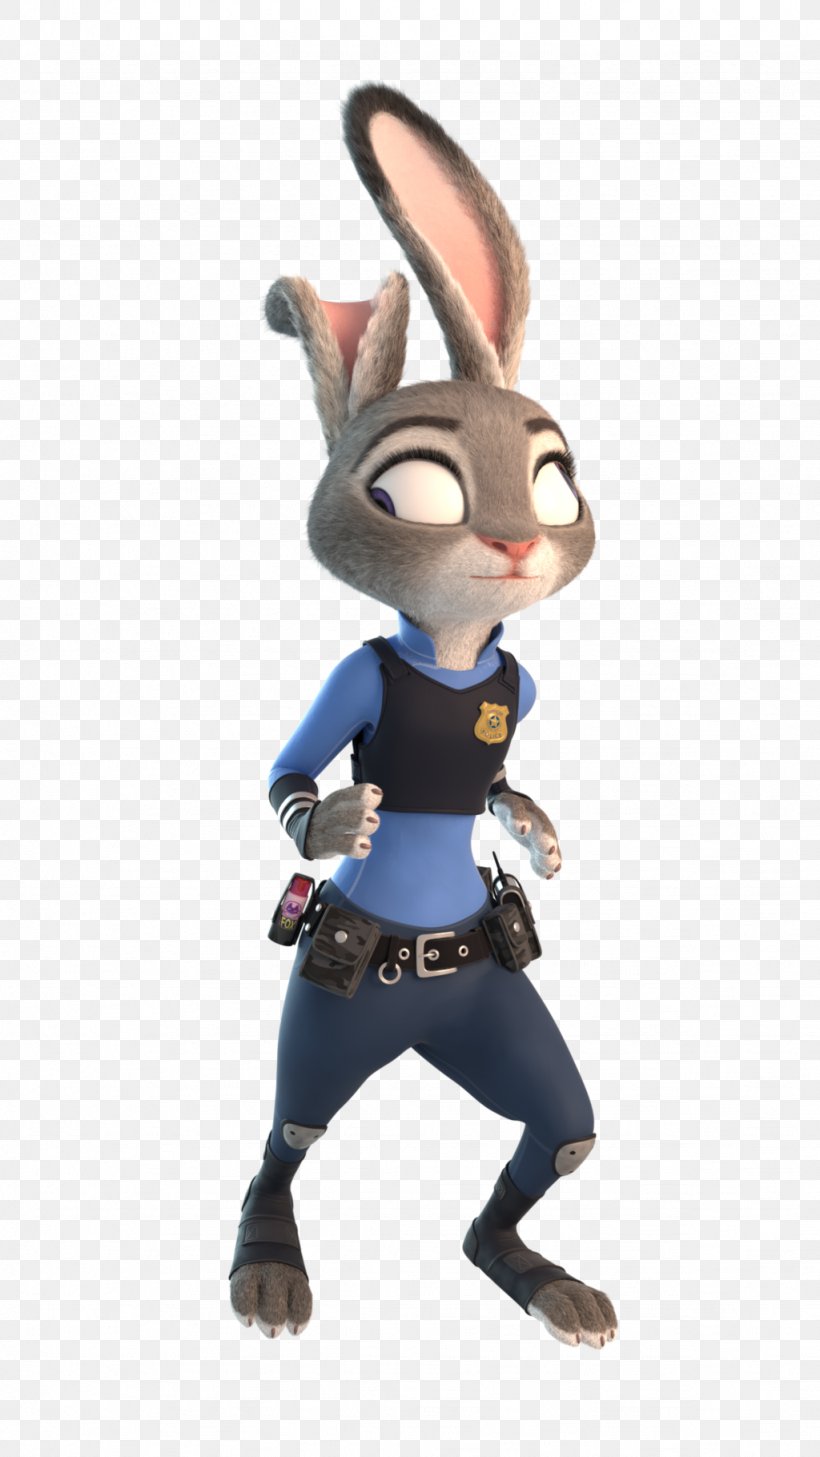 Lt. Judy Hopps Animated Cartoon Character Animation Action & Toy Figures, PNG, 1024x1820px, 2016, Lt Judy Hopps, Action Toy Figures, Animated Cartoon, Animation Download Free